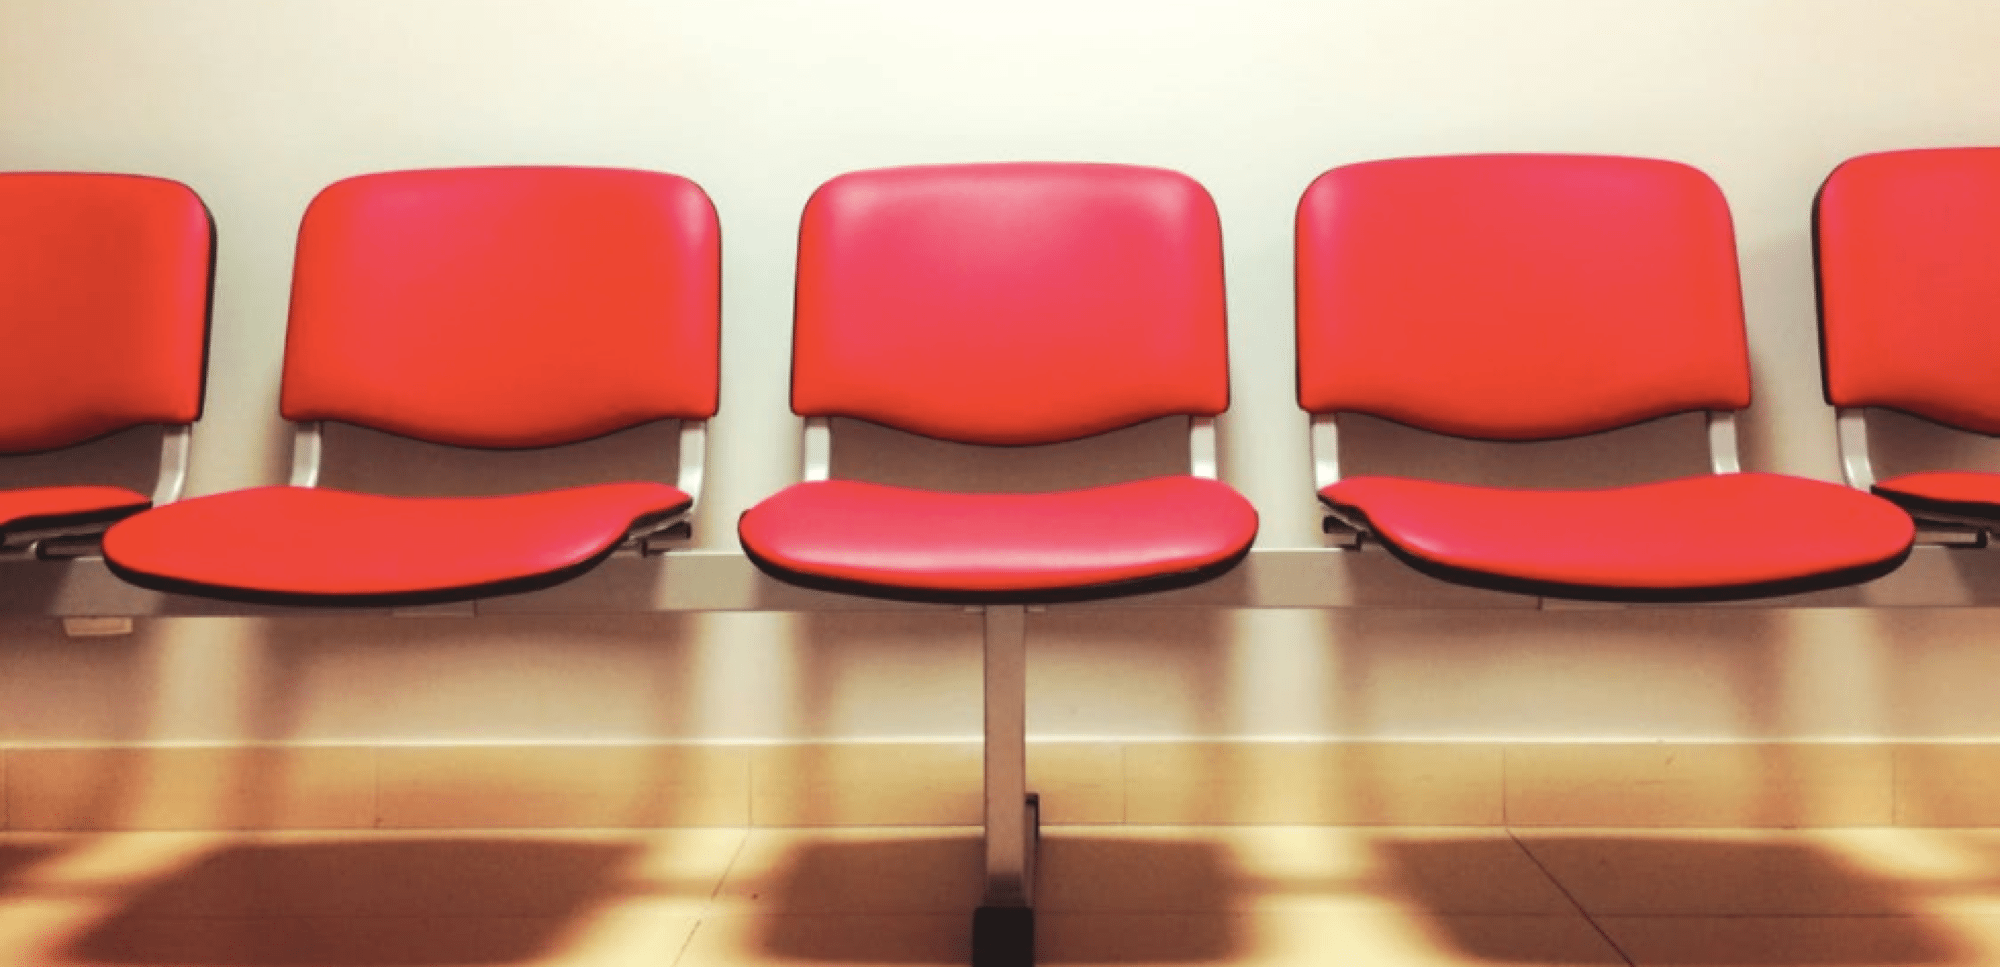 Advances in Scheduling Could Mean The End of the Waiting Room